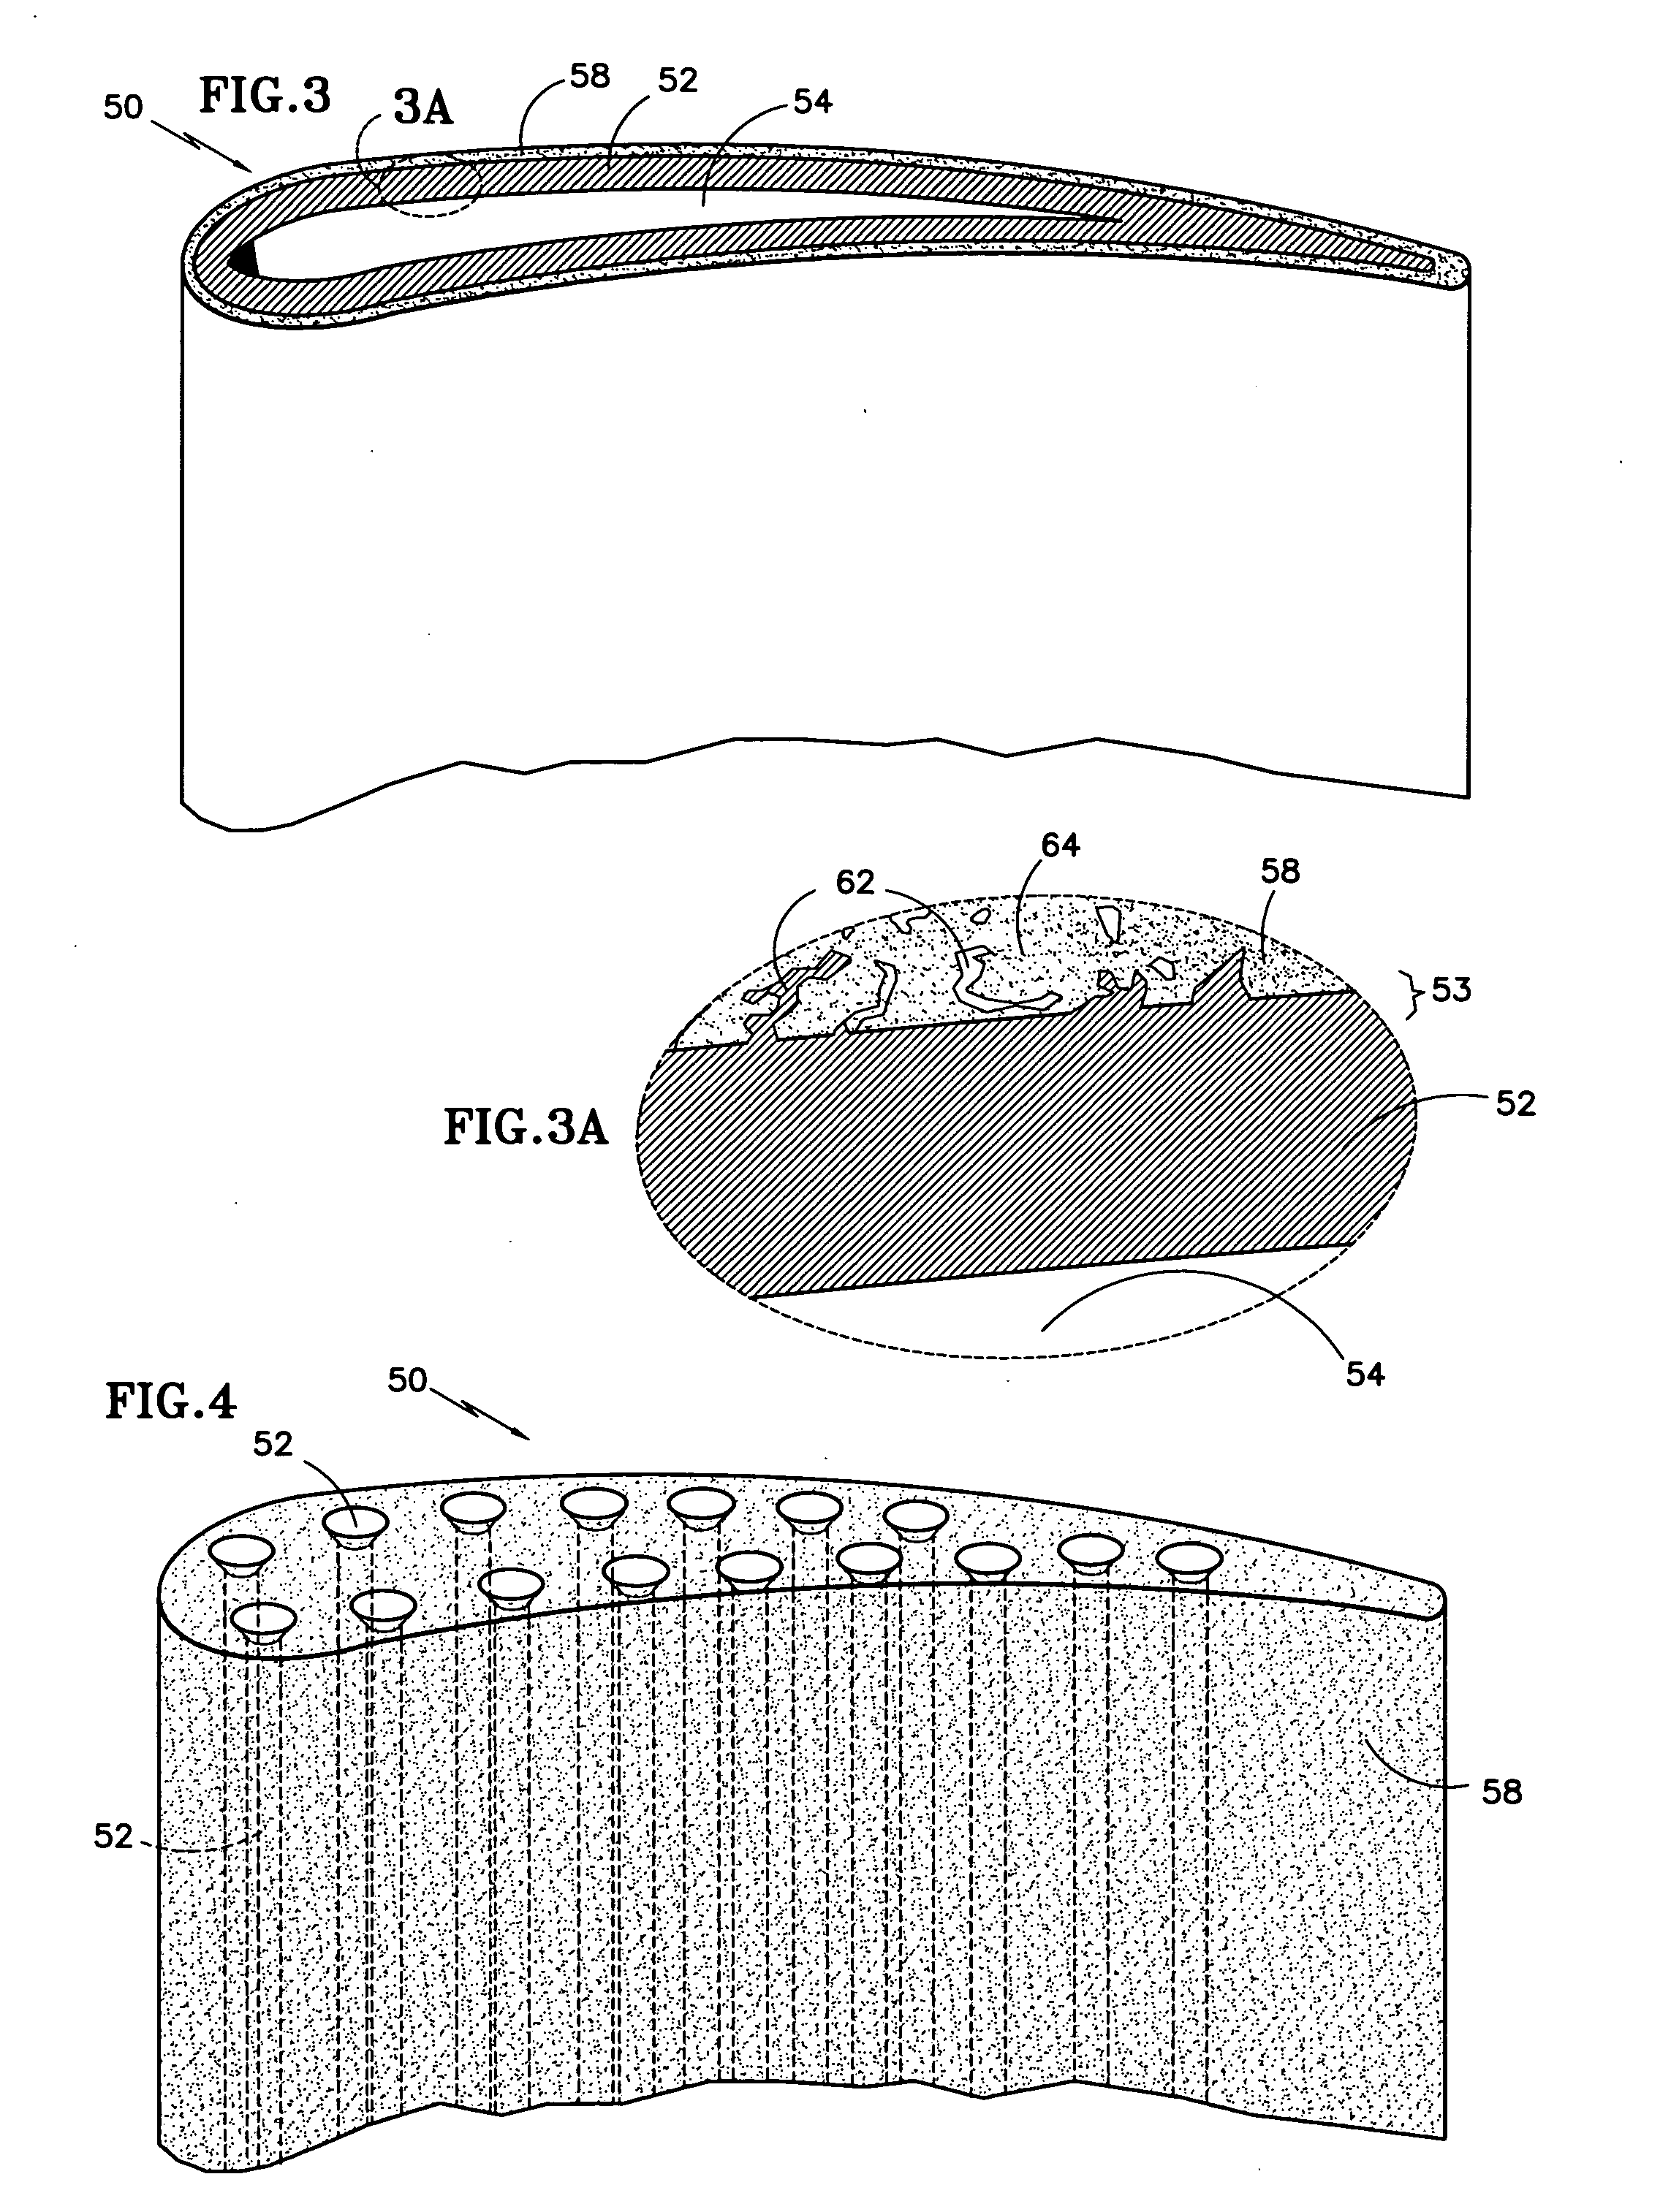 Integrated ceramic/metallic components and methods of making same